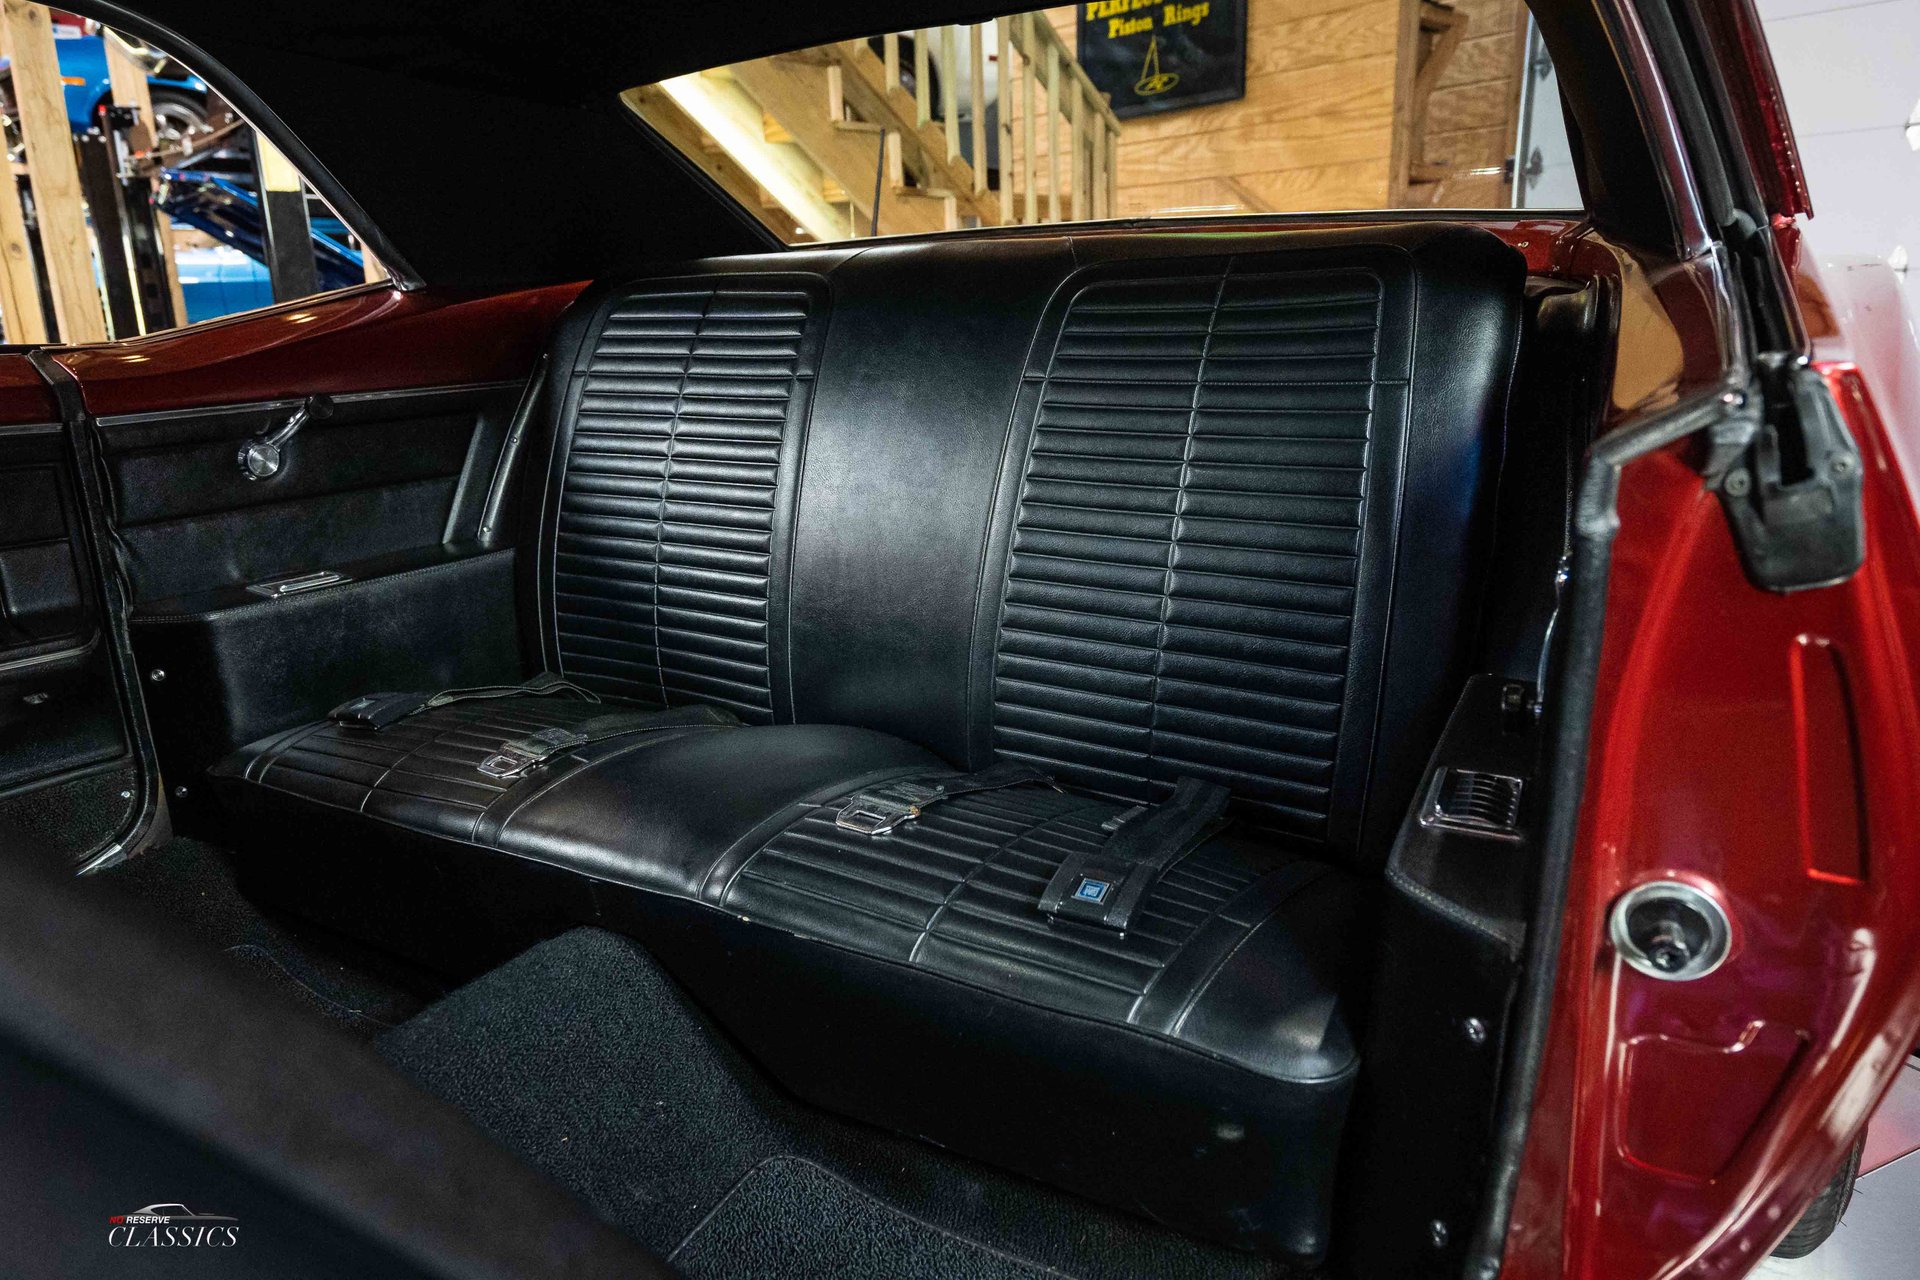 1967 Firebird Deluxe Seat Foam - Dashes Direct Classic Car & Truck  Restoration Products